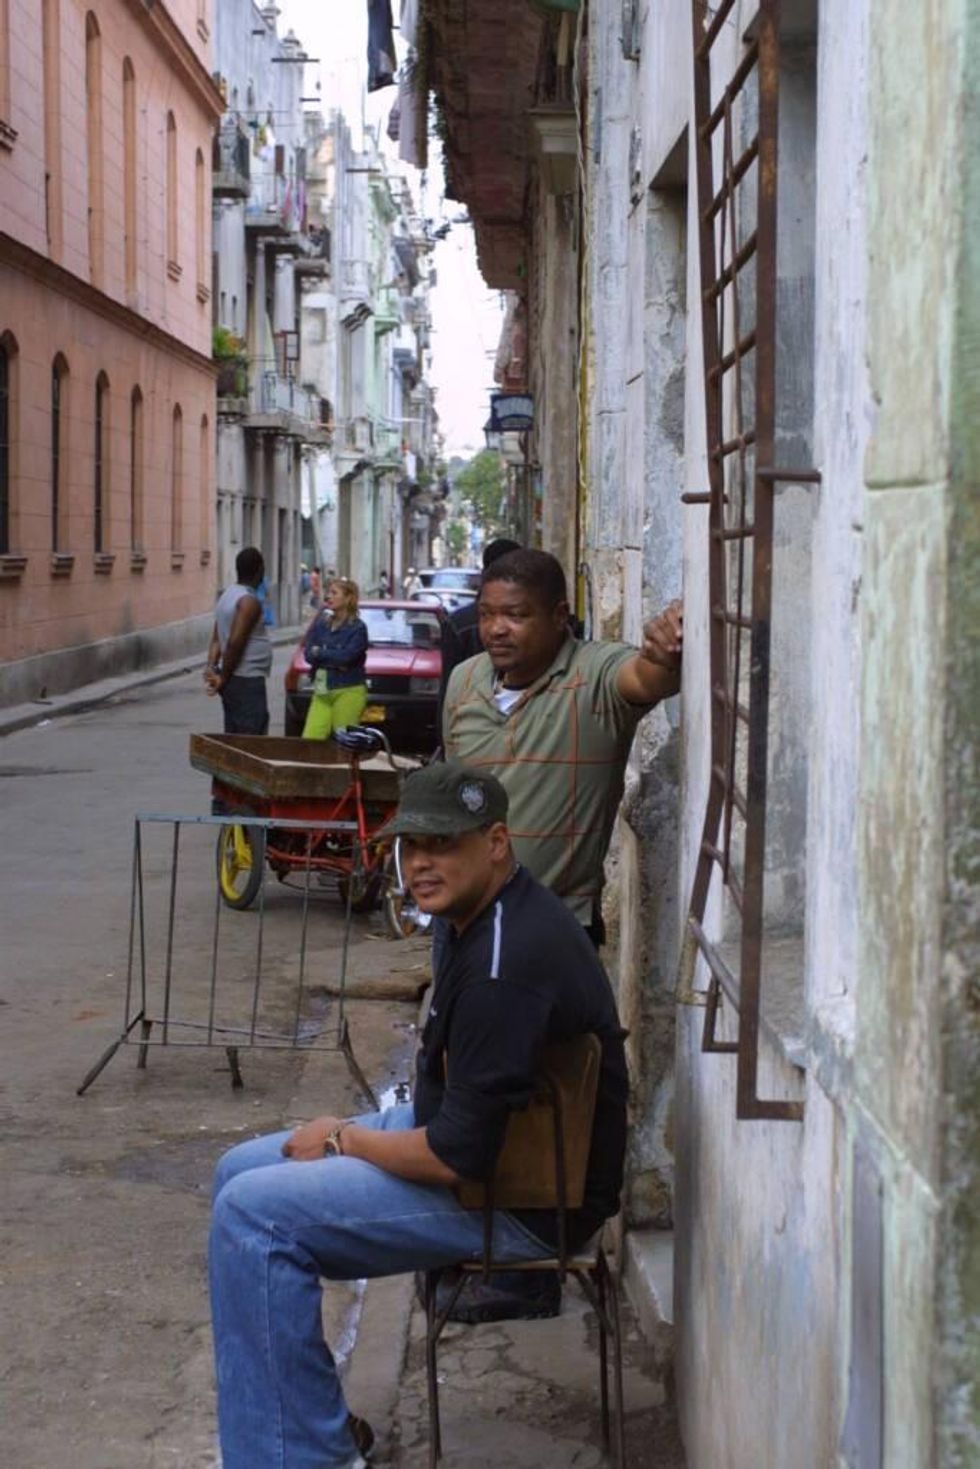 Residents of Old Havana. Photo by Reese Erlich